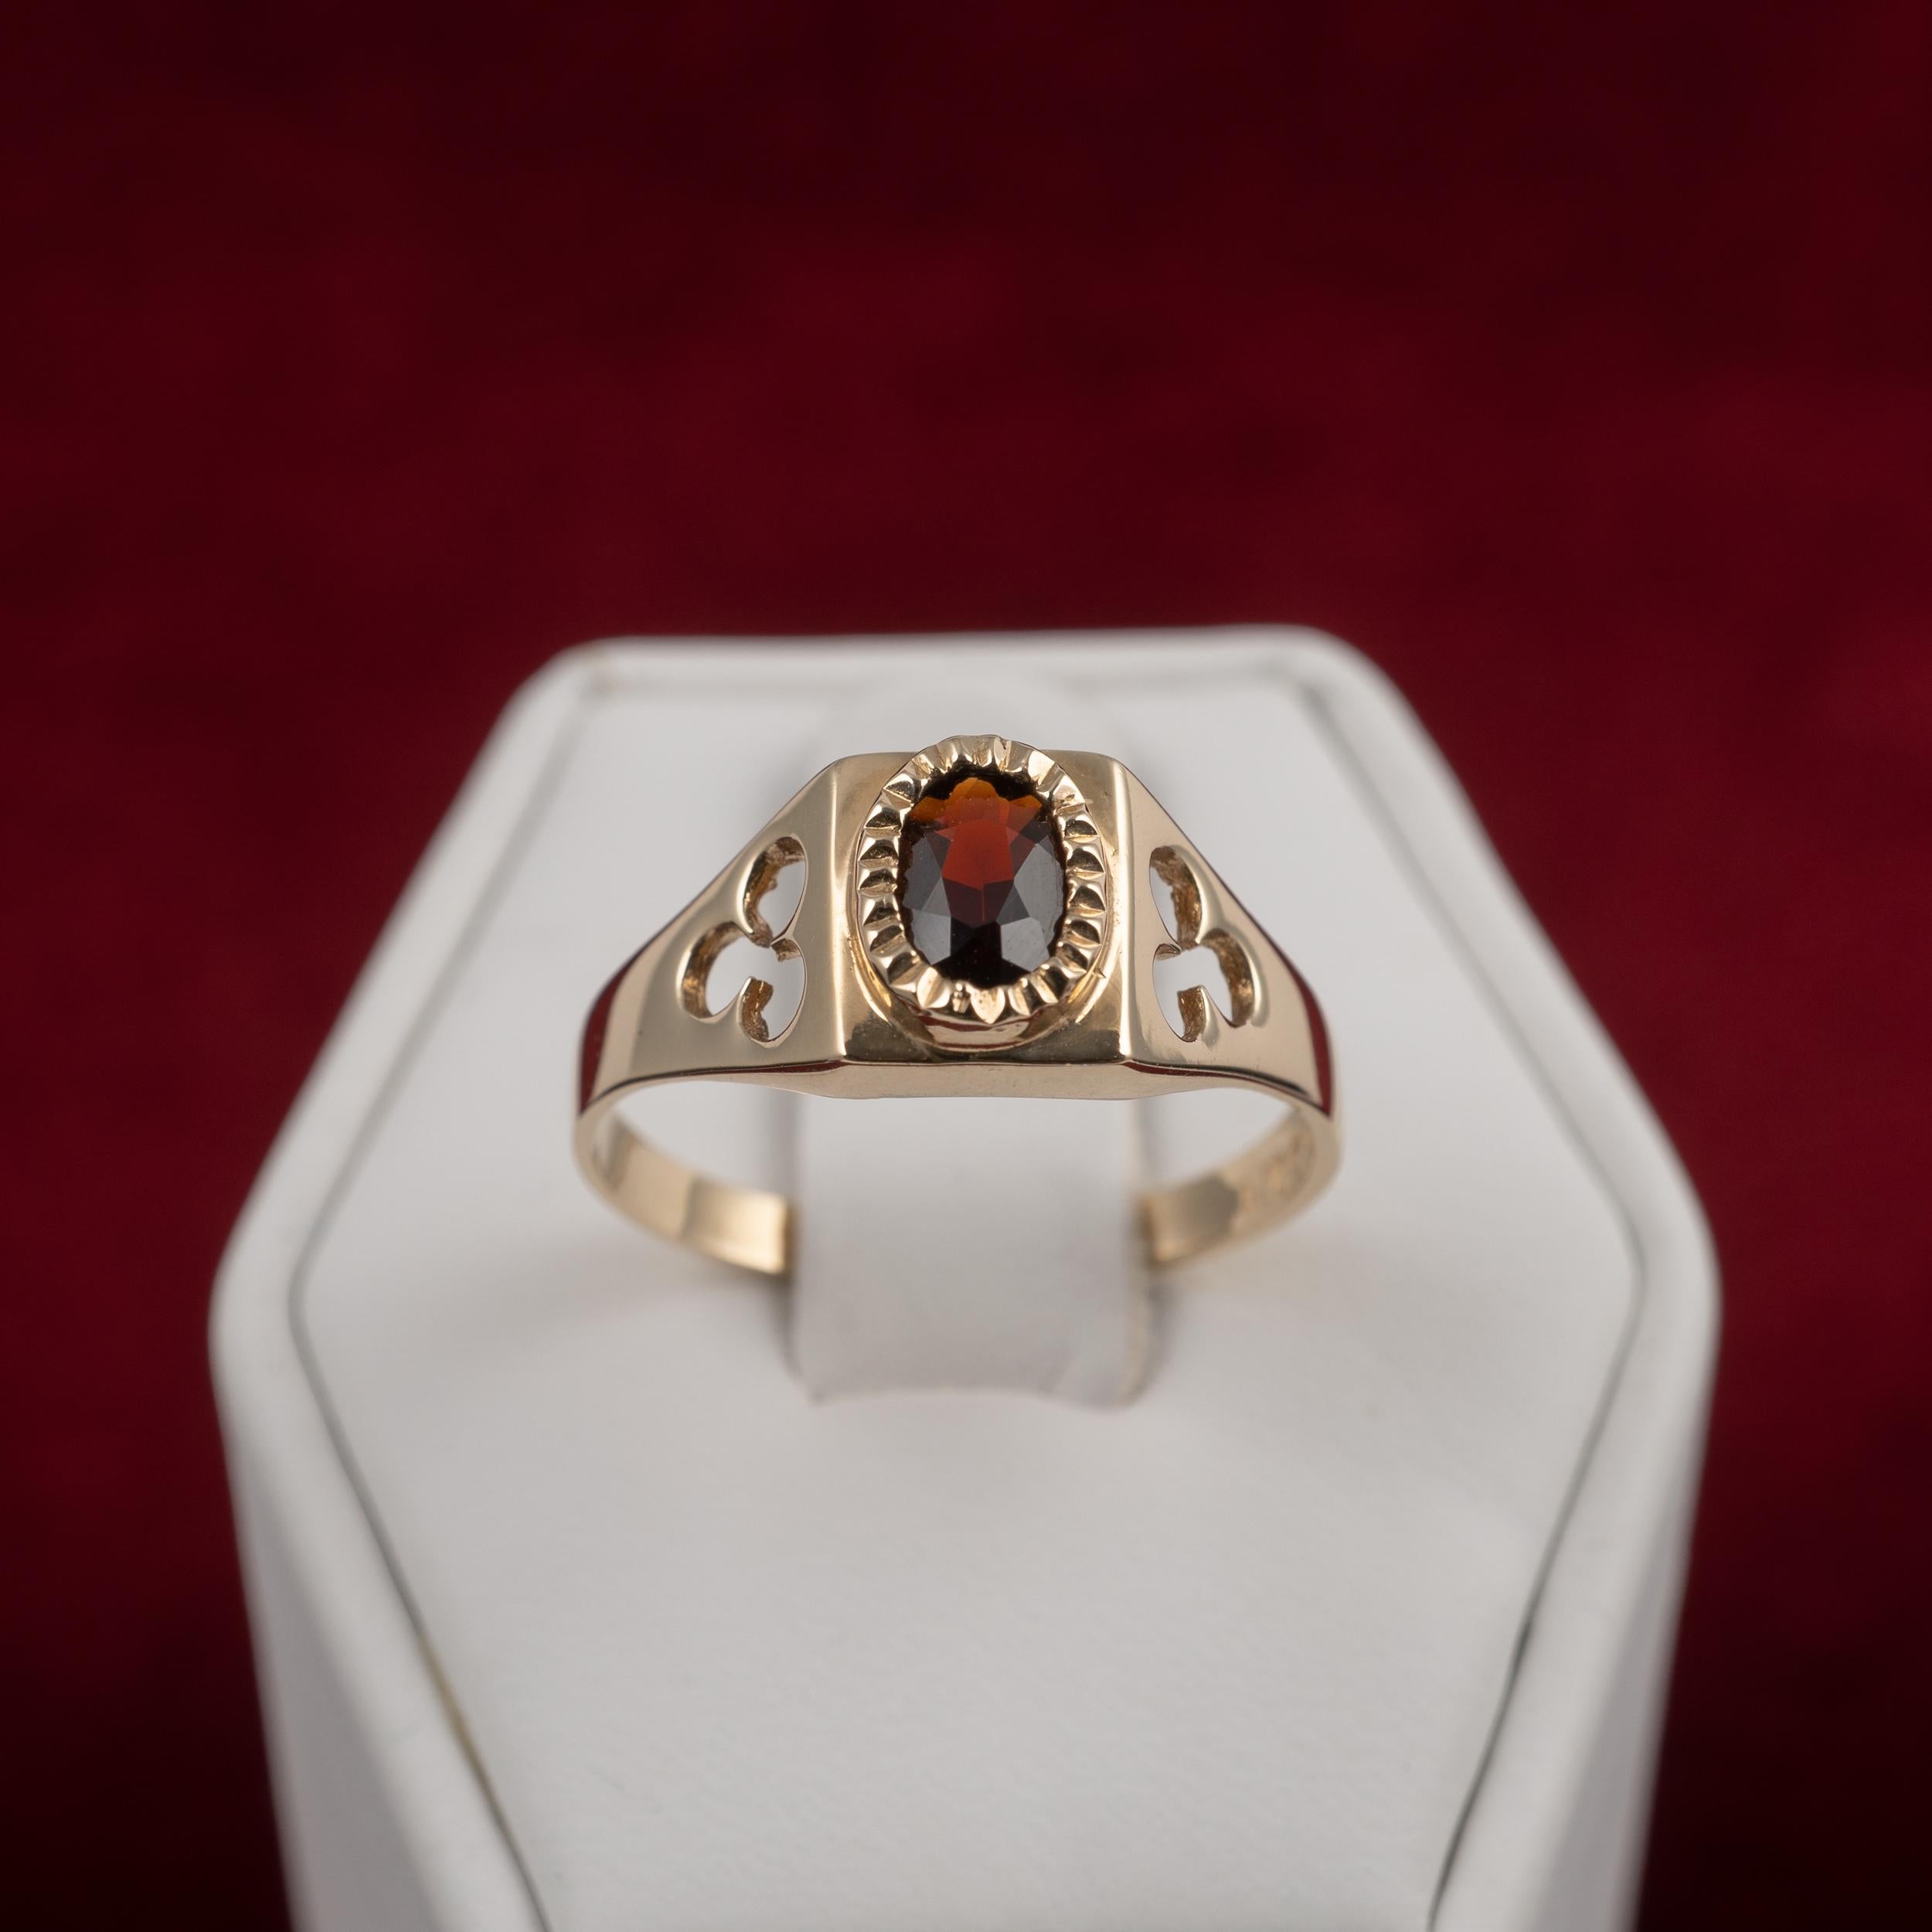 This contemporary garnet solitaire ring features oval-cut garnet and shamrock cut out shoulder design. Crafted in 9 karat gold, the ring is presented in very clean condition inside a neat leatherette ring box.

- Ring size: UK/AU size N/O  US ring